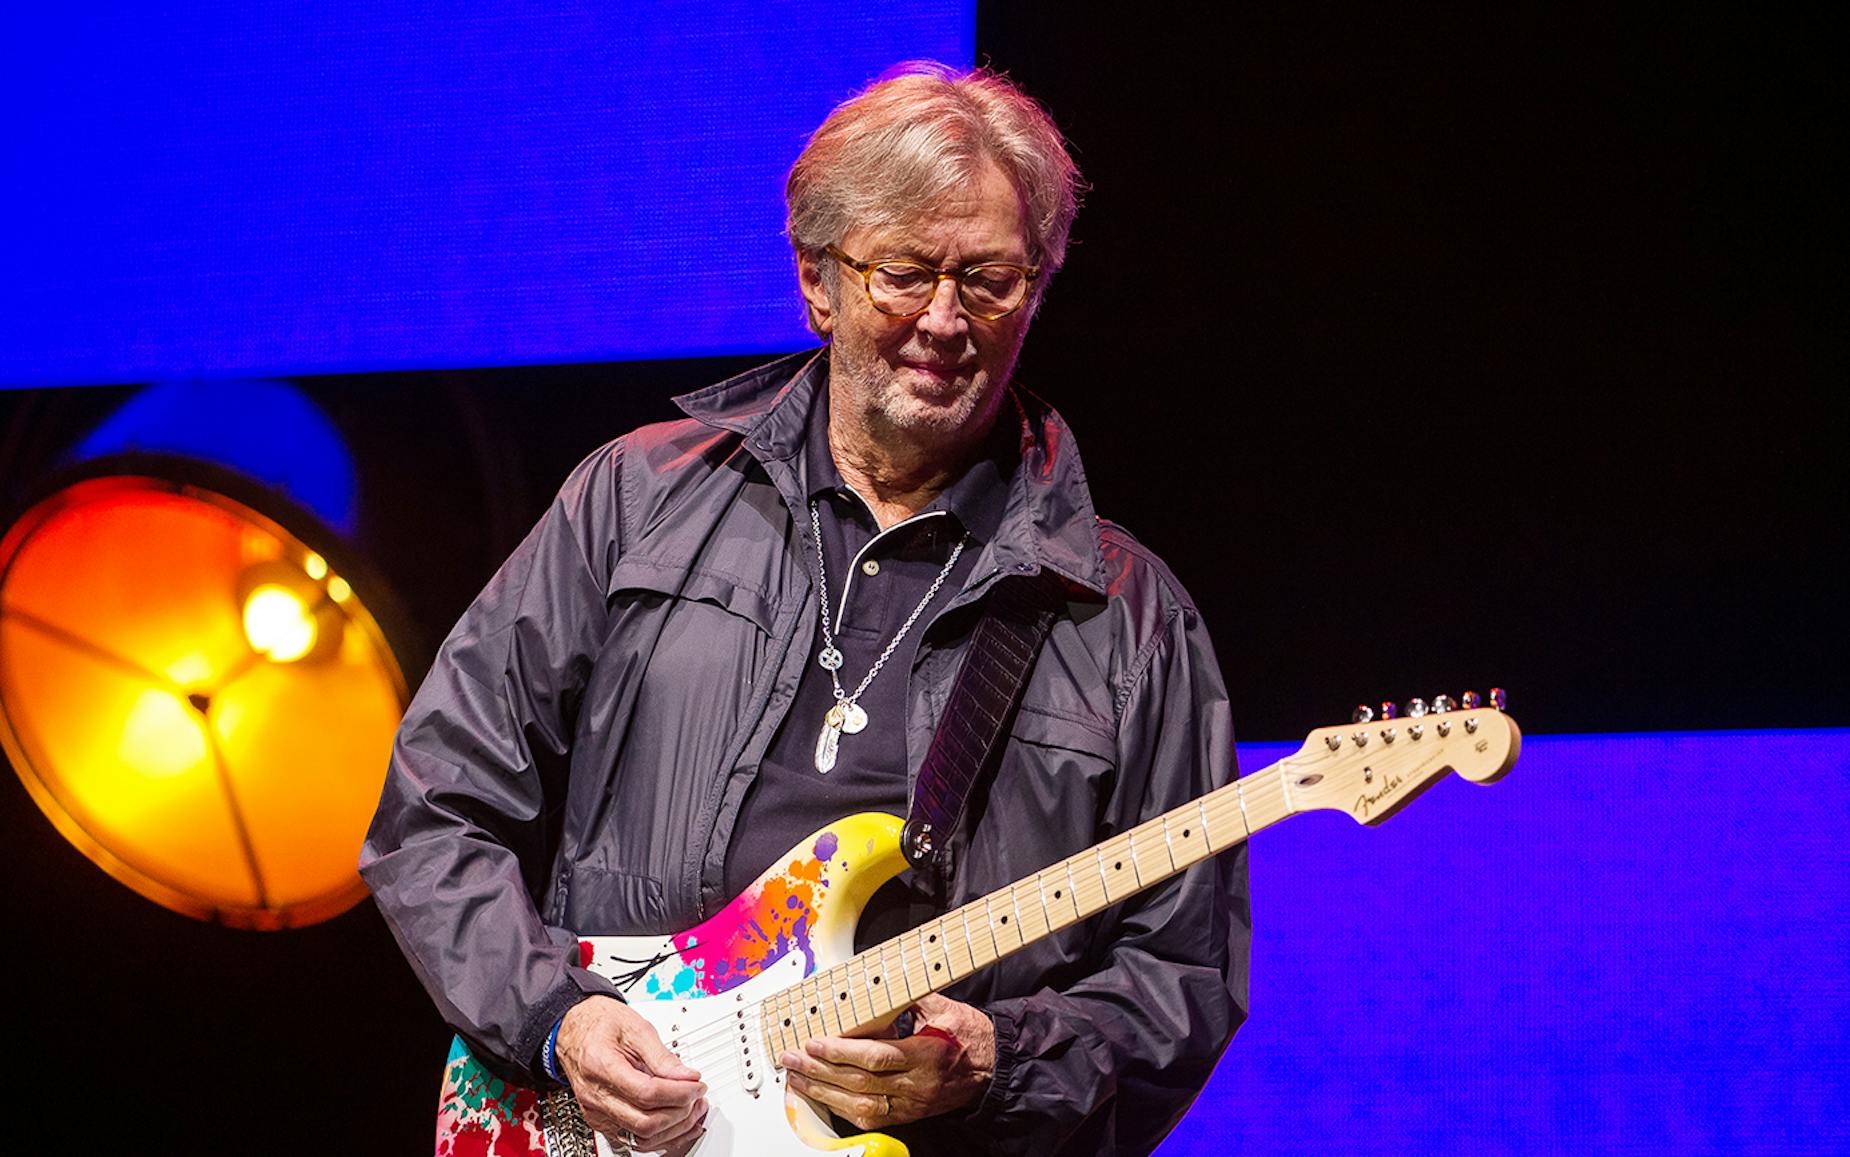 Eric Clapton Makes Dallas the Center of the Guitar Universe Once More